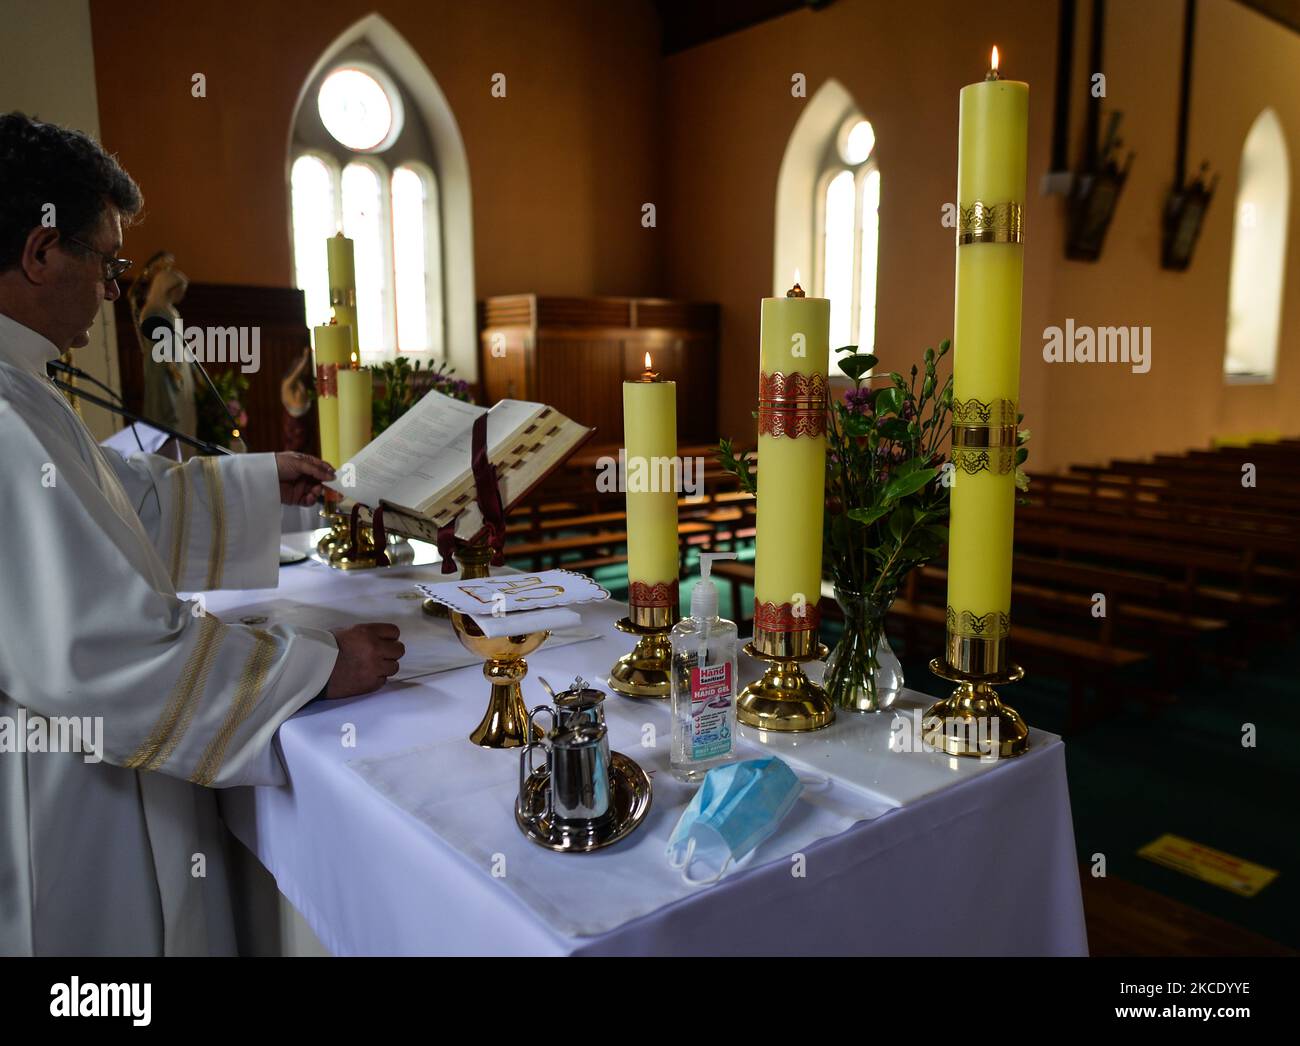 Father Krzysztof Sikora during a private prayer at the closed and empty Roman Catholic Church 'Our Lady Star Of The Sea' in Roundstone. Due to Covid-19 restrictions, all religious ceremonies are still canceled. Geographically, Roundstone parish is considered Ireland's largest parish and stretches from the Gurteen Beaches to the Twelve Bens and Mám Tuirc Mountains. Until the 1990s, the parish was served by three priests, now there is only one to look after five churches. The current Parish Priest, a Polish born Fr Krzysztof Sikora, is a member of the religious congregation of the Divine Word Mi Stock Photo